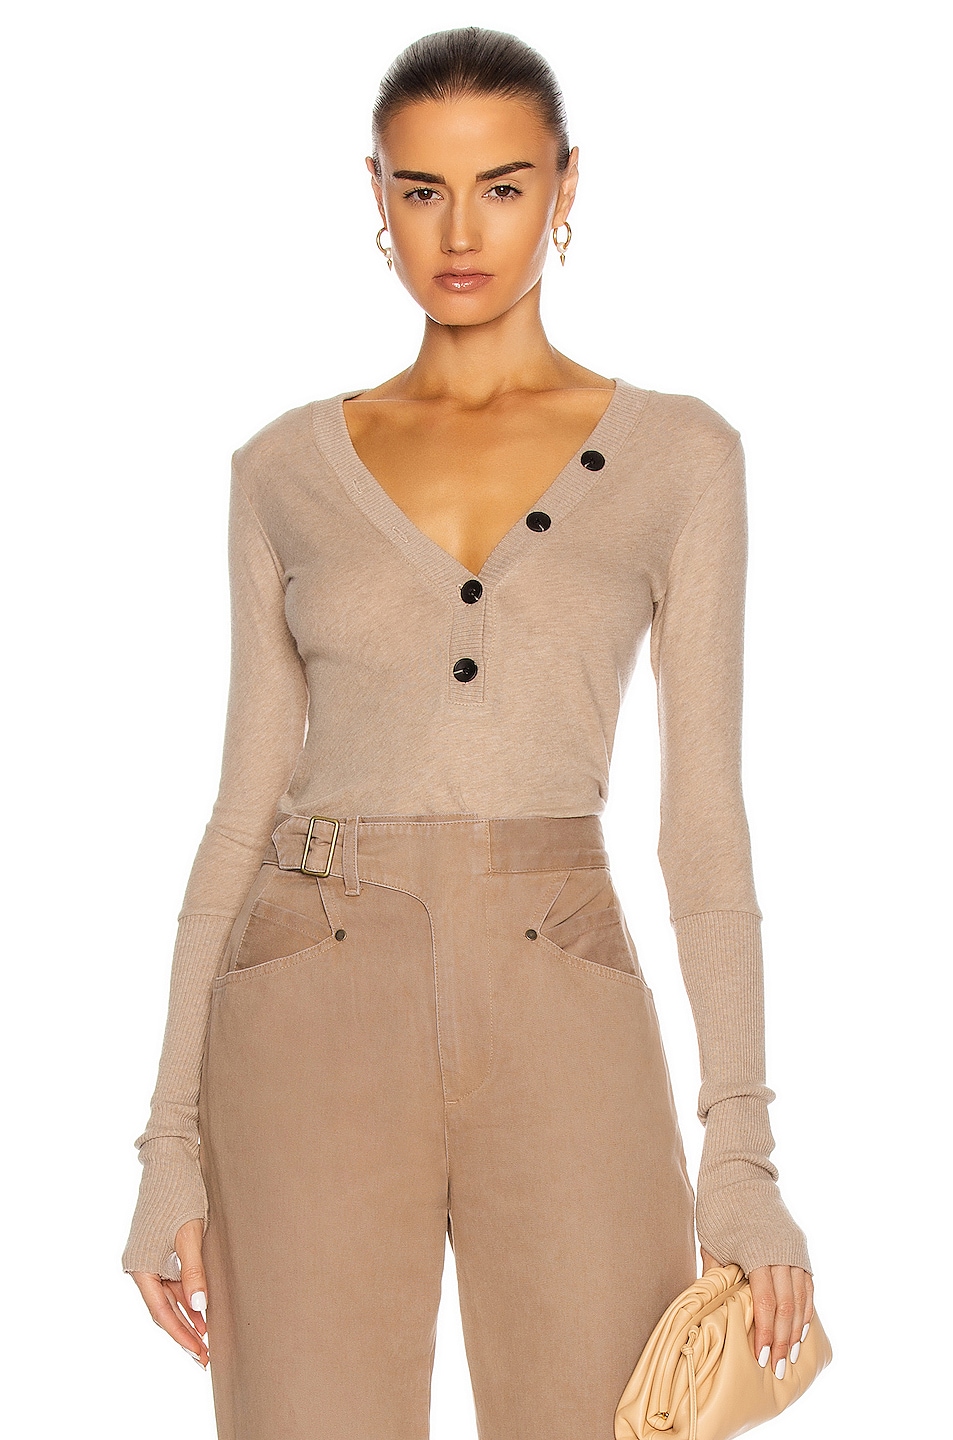 Cashmere Long Sleeve Cuffed Henley Top in Neutral